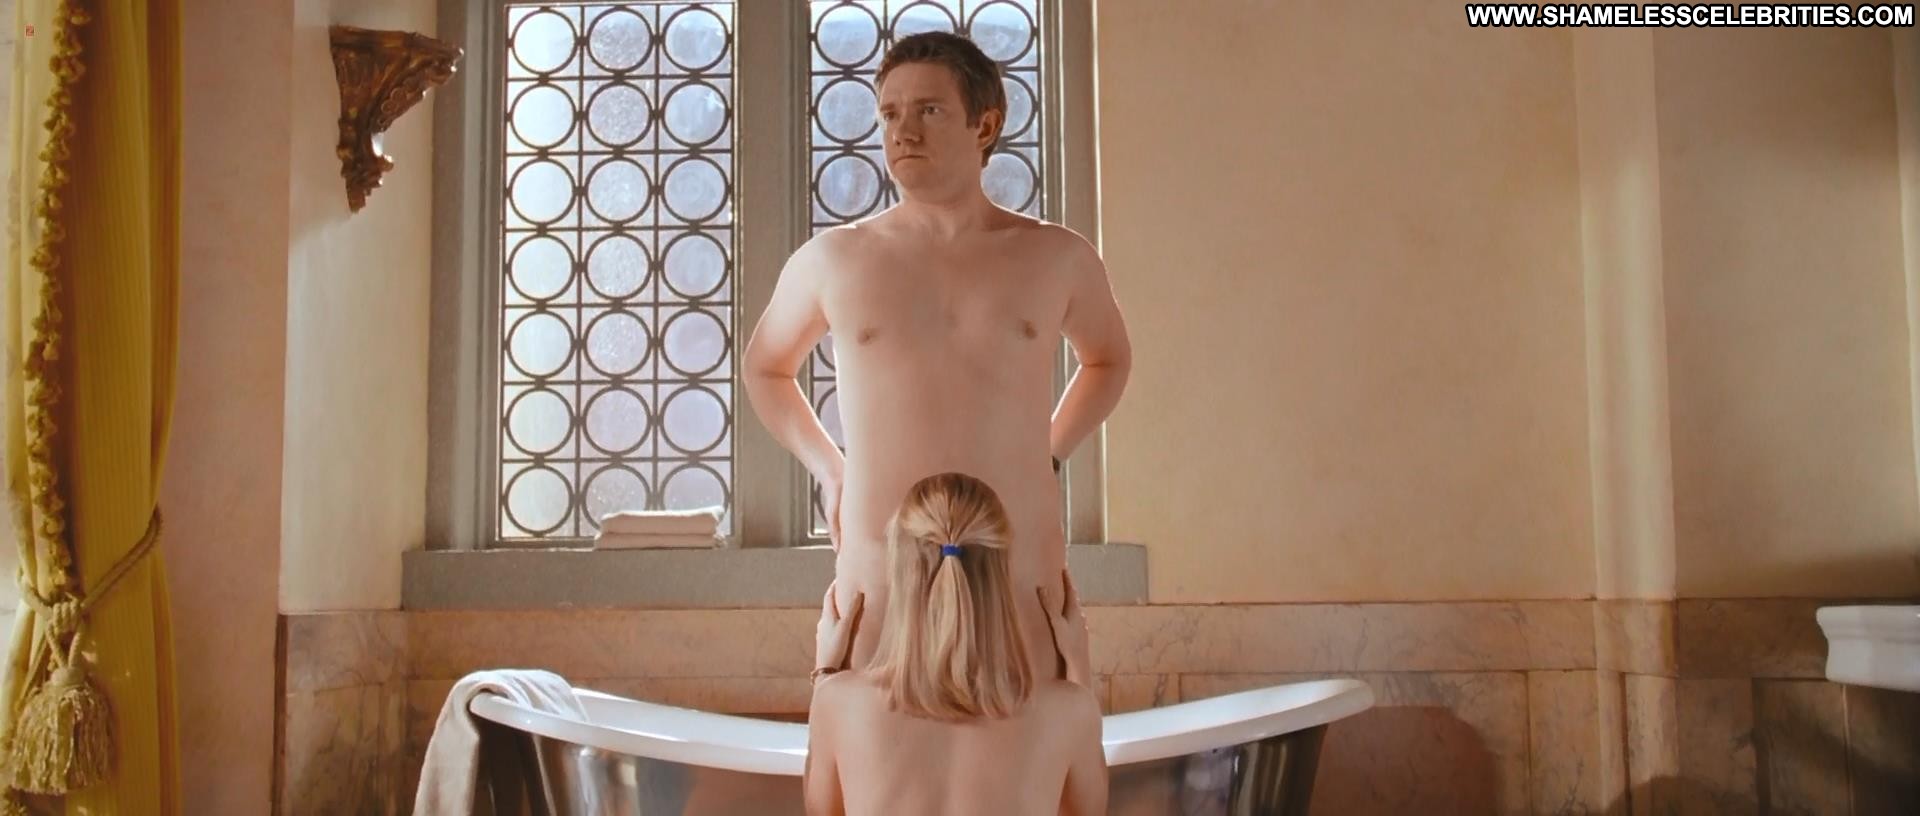 Joanna Page Love Actually Celebrity Posing Hot Movie Nude Topless Sex